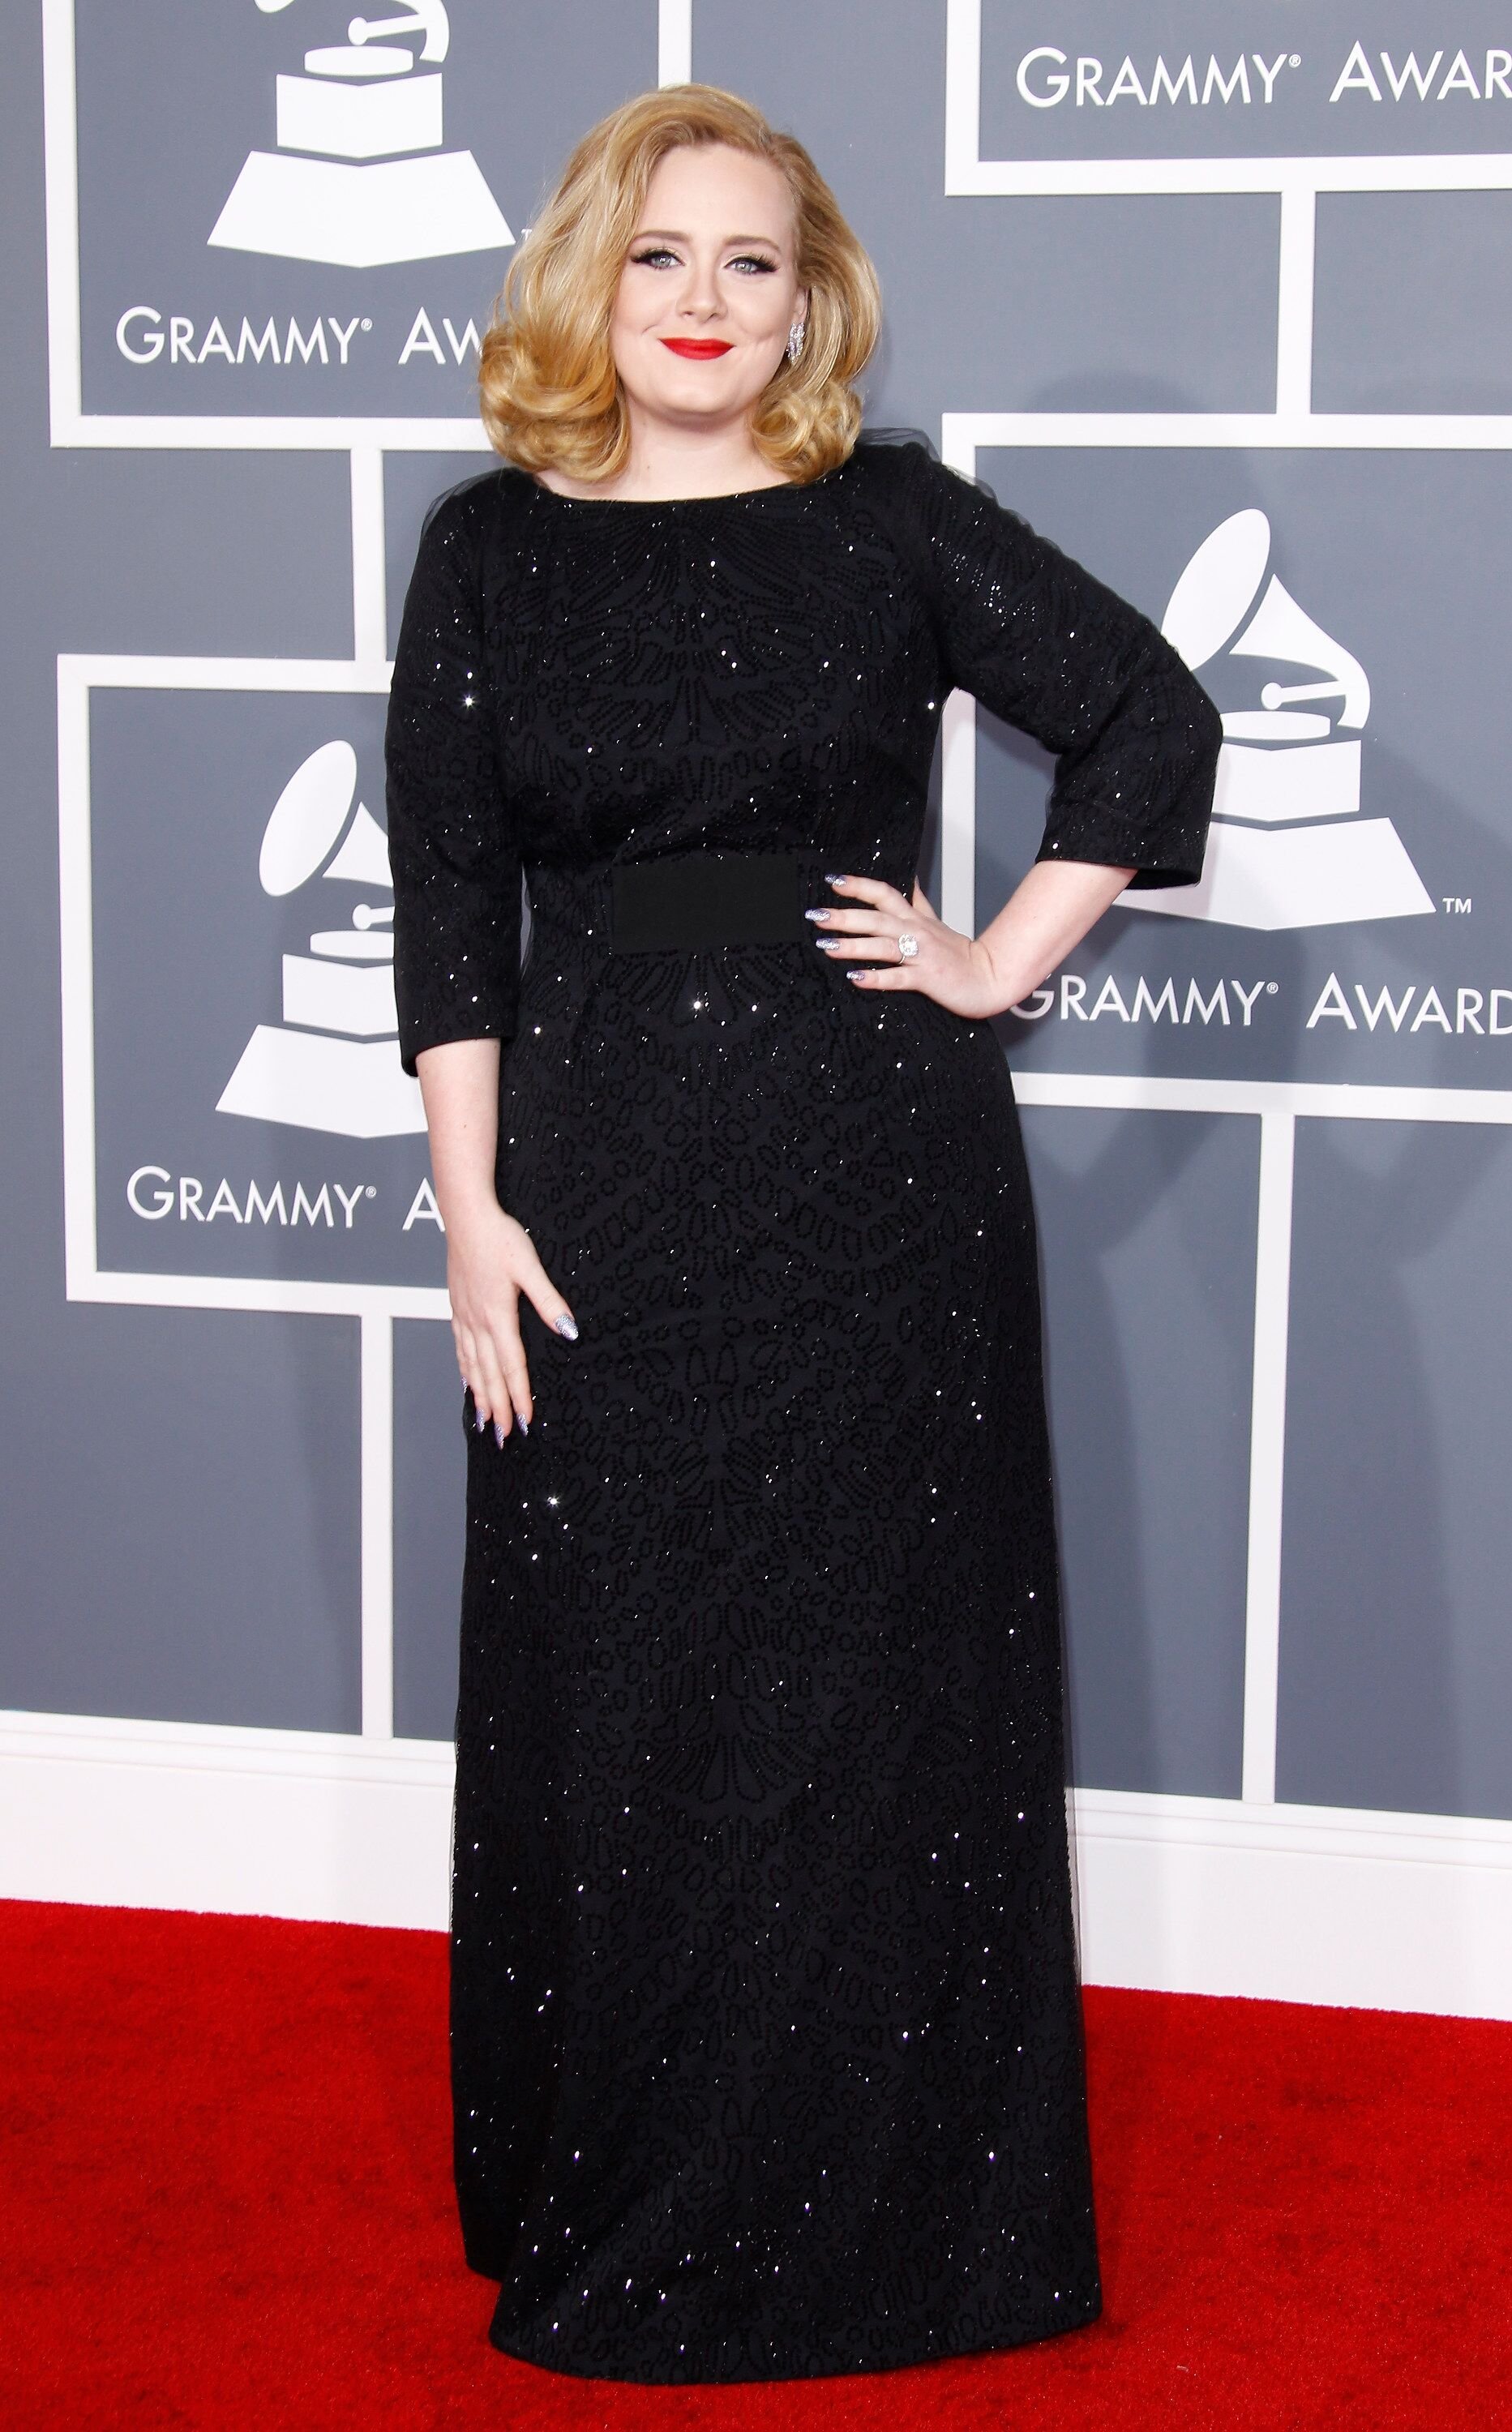 Adele arrives at the 54th Annual GRAMMY Awards held at the Staples Center on February 12, 2012. | Photo: Getty Images